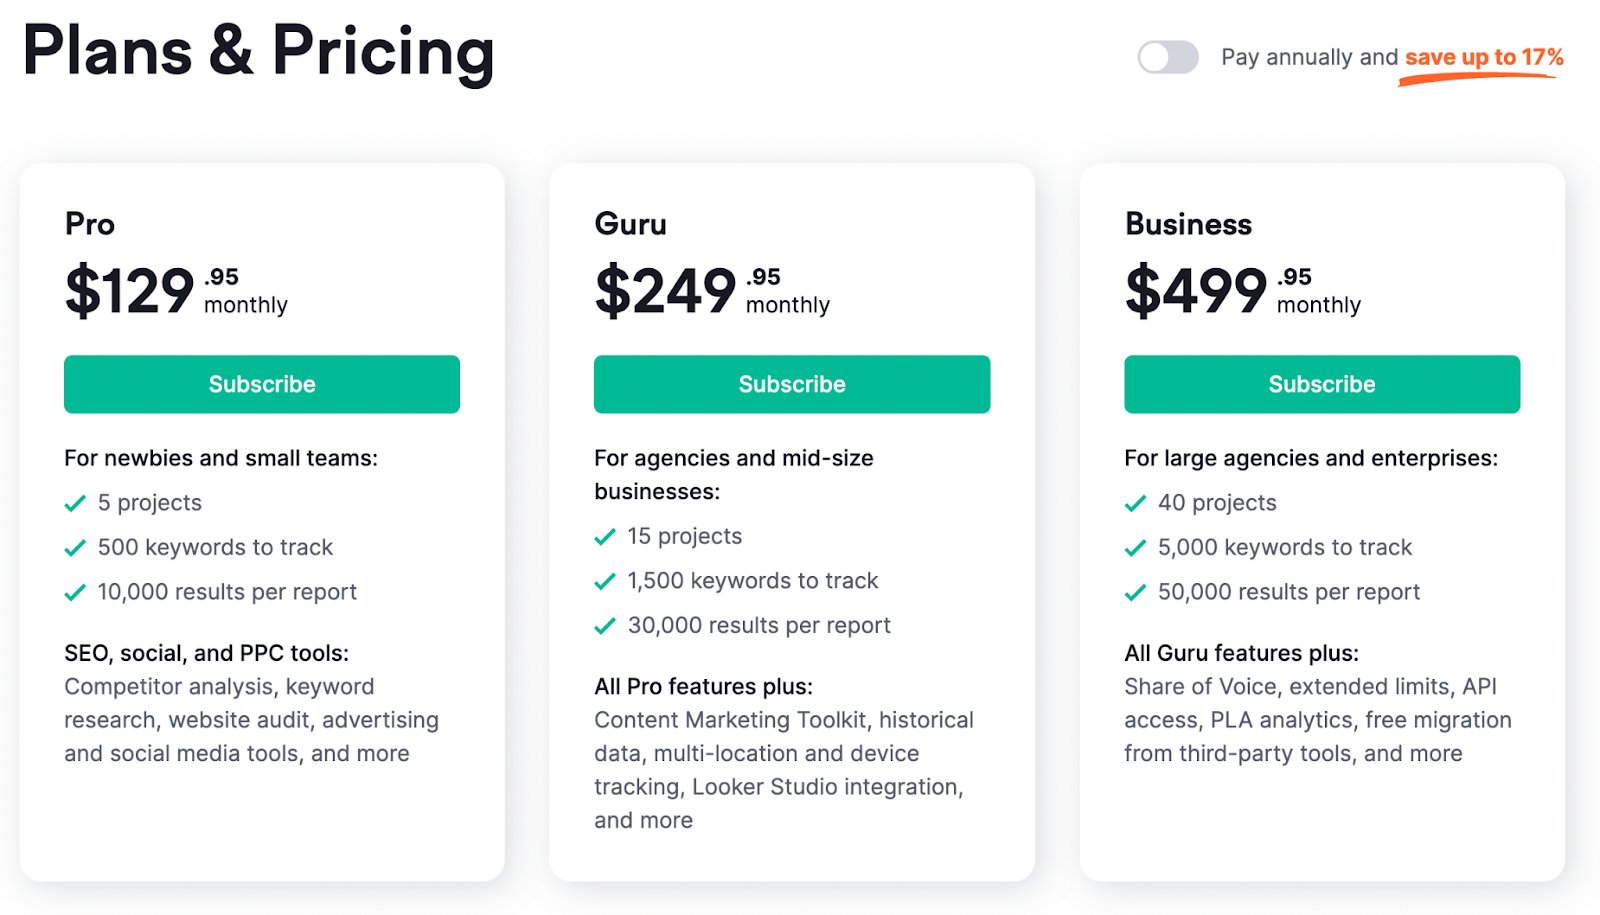 Semrush’s Plans & Pricing page